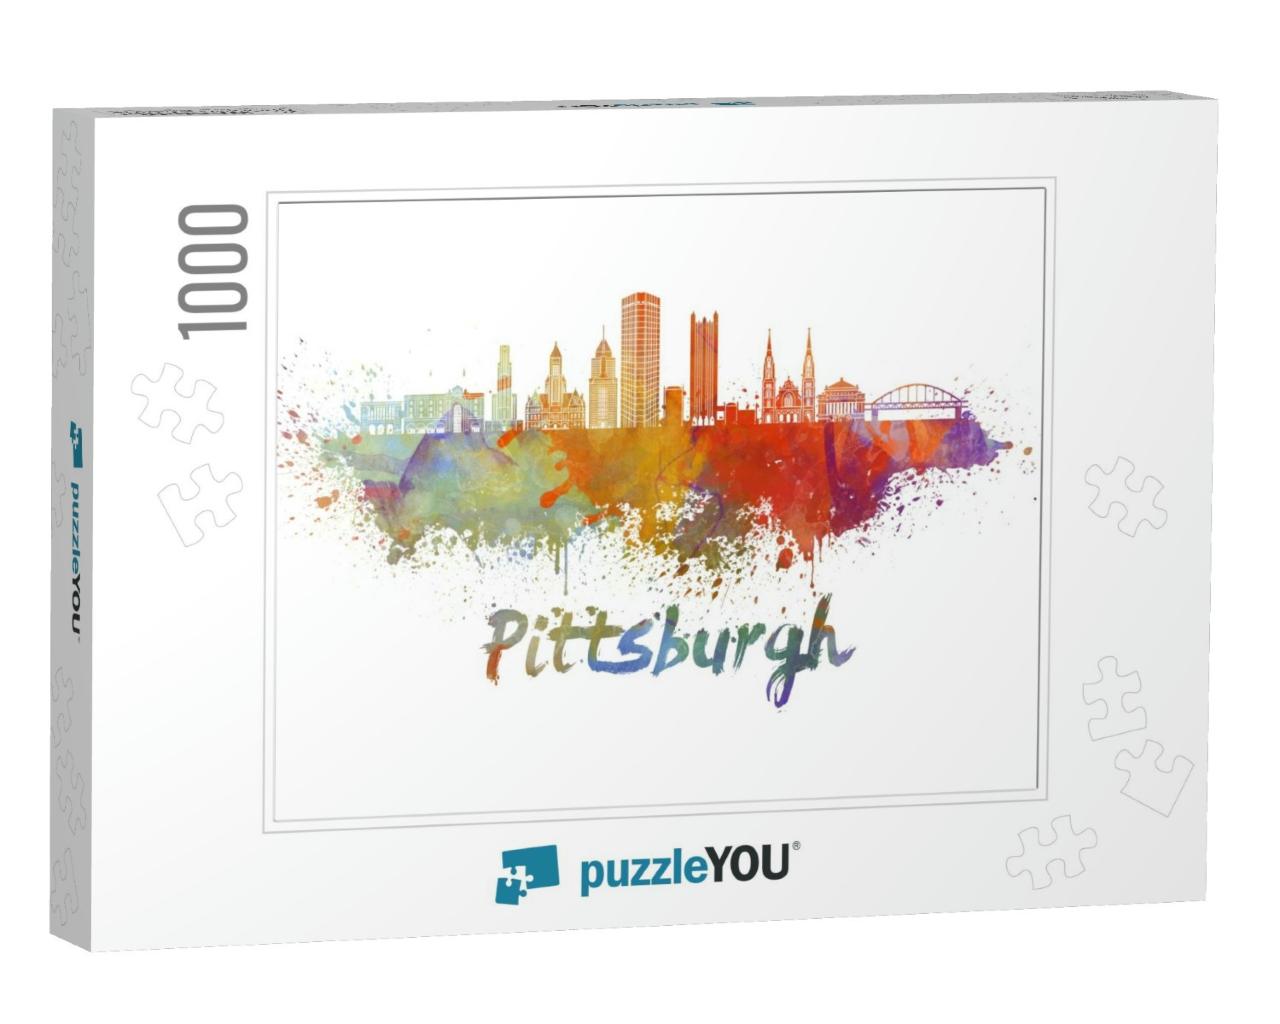 Pittsburgh V2 Skyline in Watercolor Splatters with Clippi... Jigsaw Puzzle with 1000 pieces